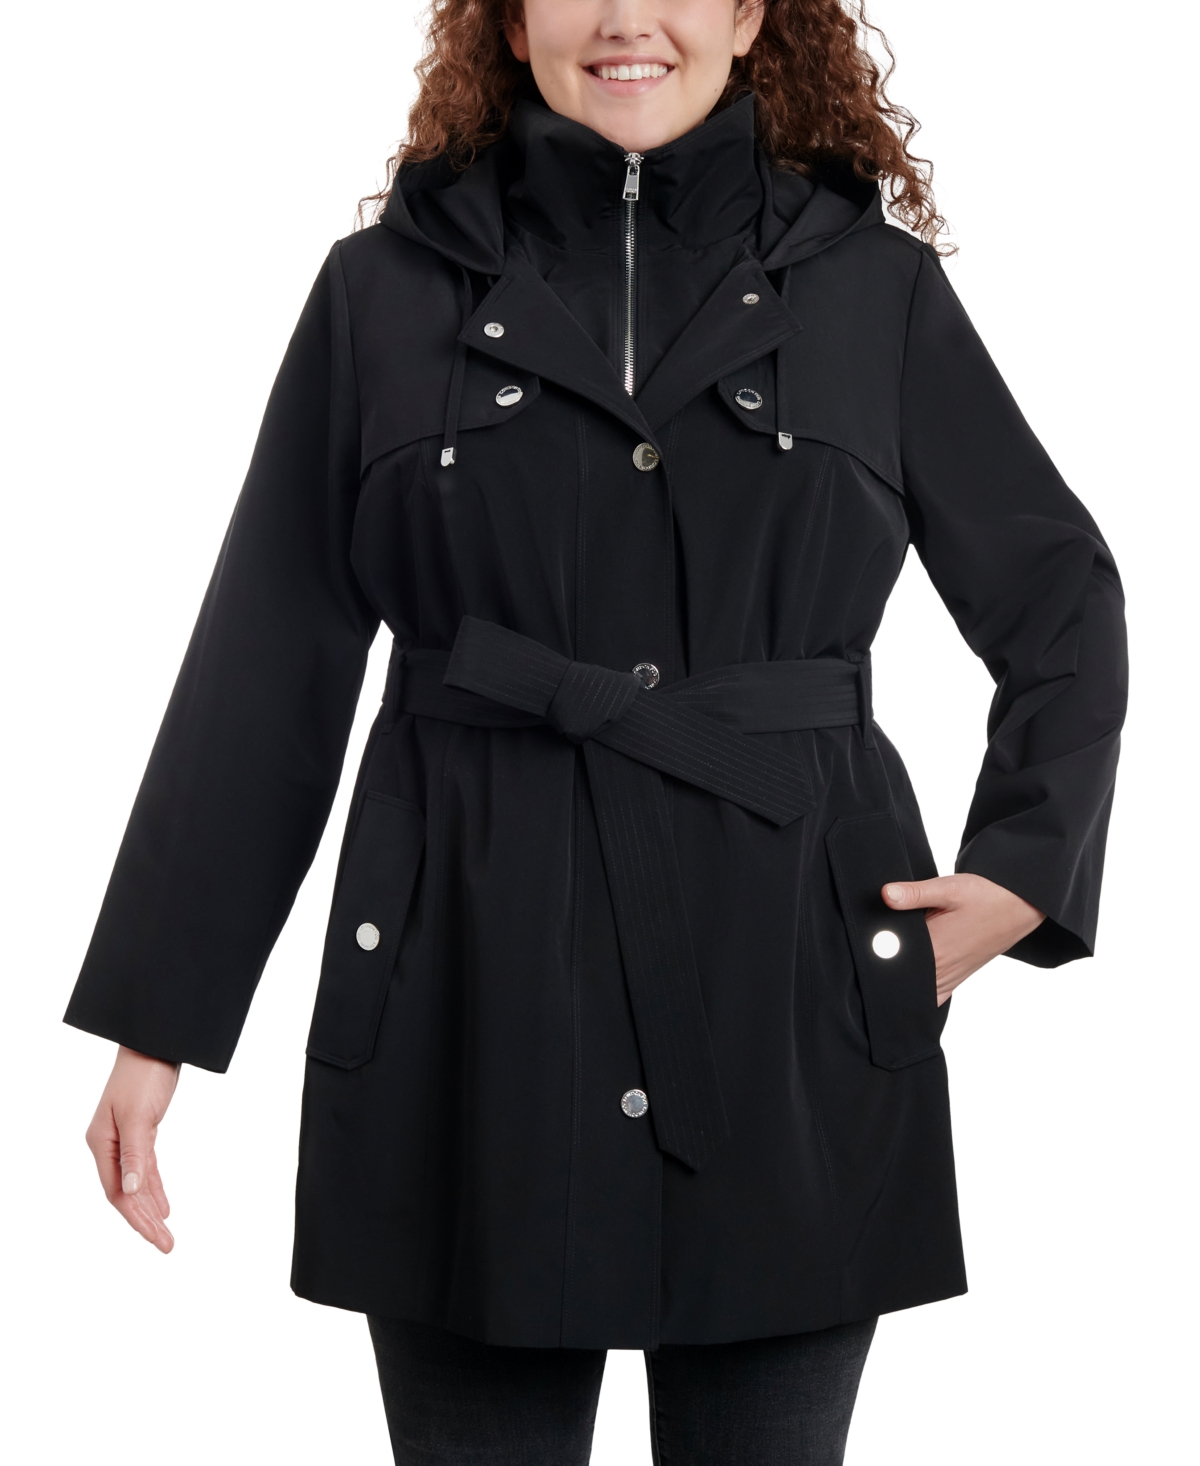 London Fog Women's Plus Size 38" Double-Breasted Hooded Trench Coat